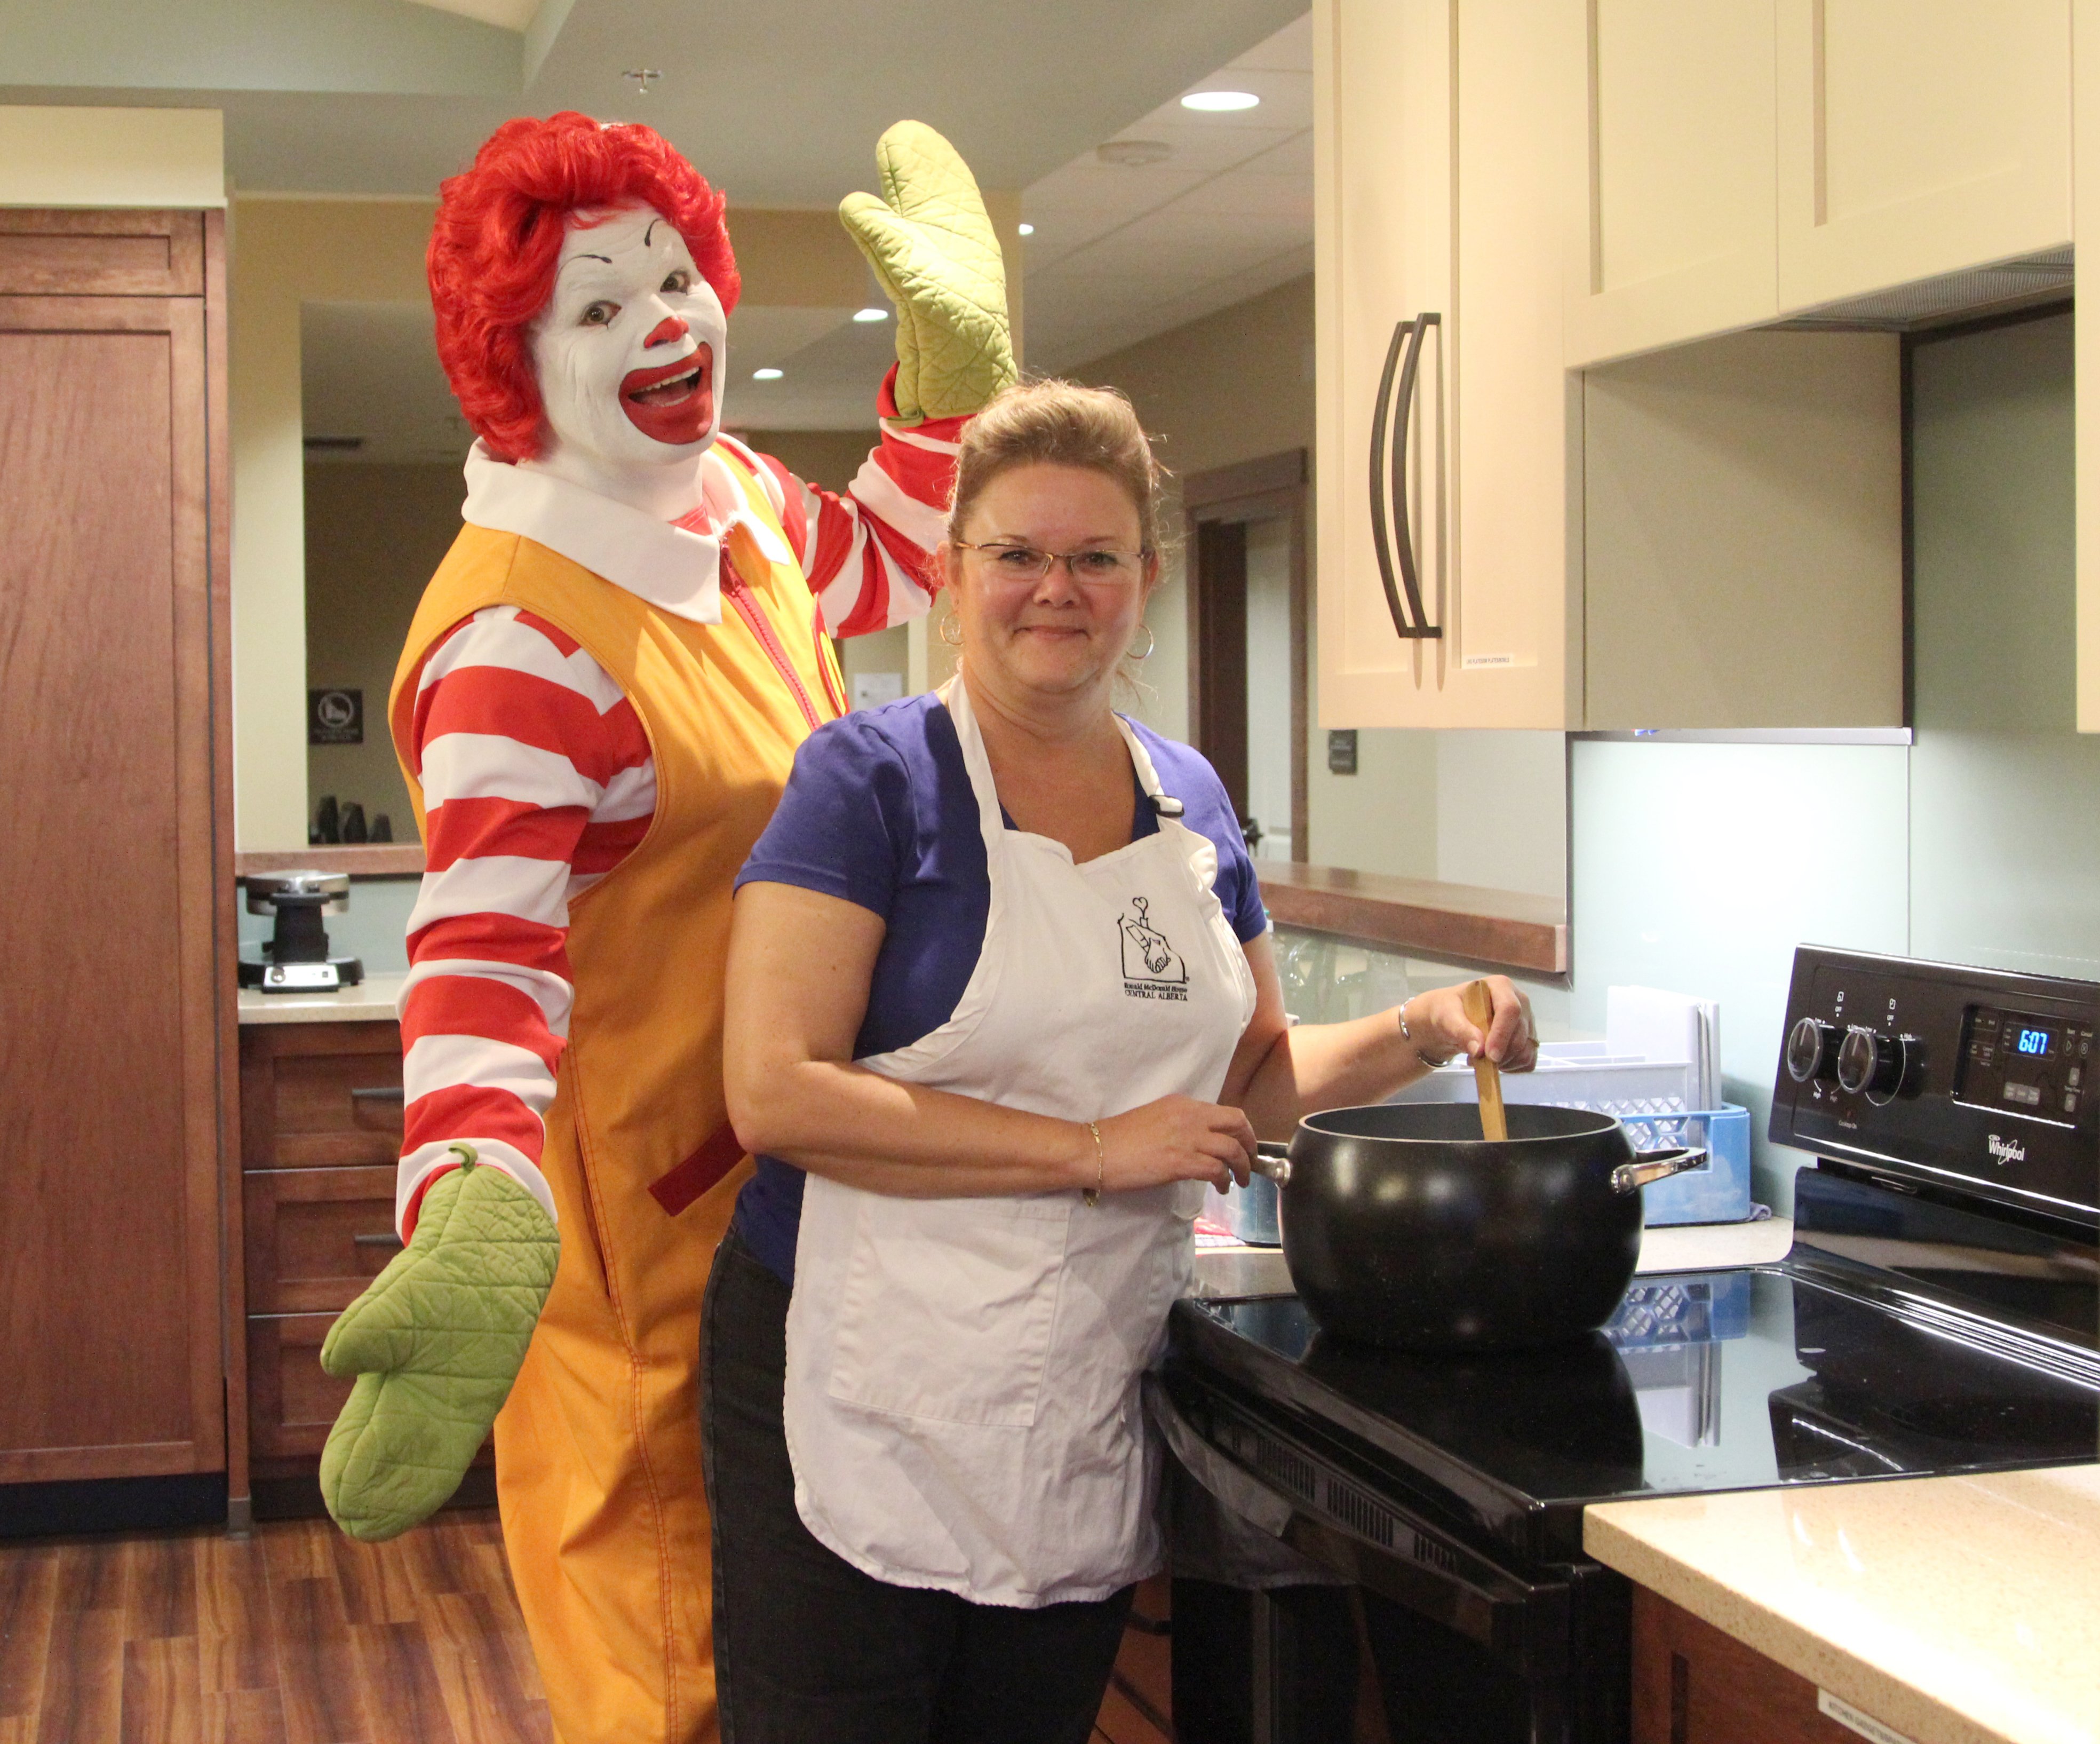 CELEBRATION – Ronald McDonald helps volunteer Shawna Allwright prepare a meal for guests at the House. The Ronald McDonald House is celebrating its first year anniversary today.